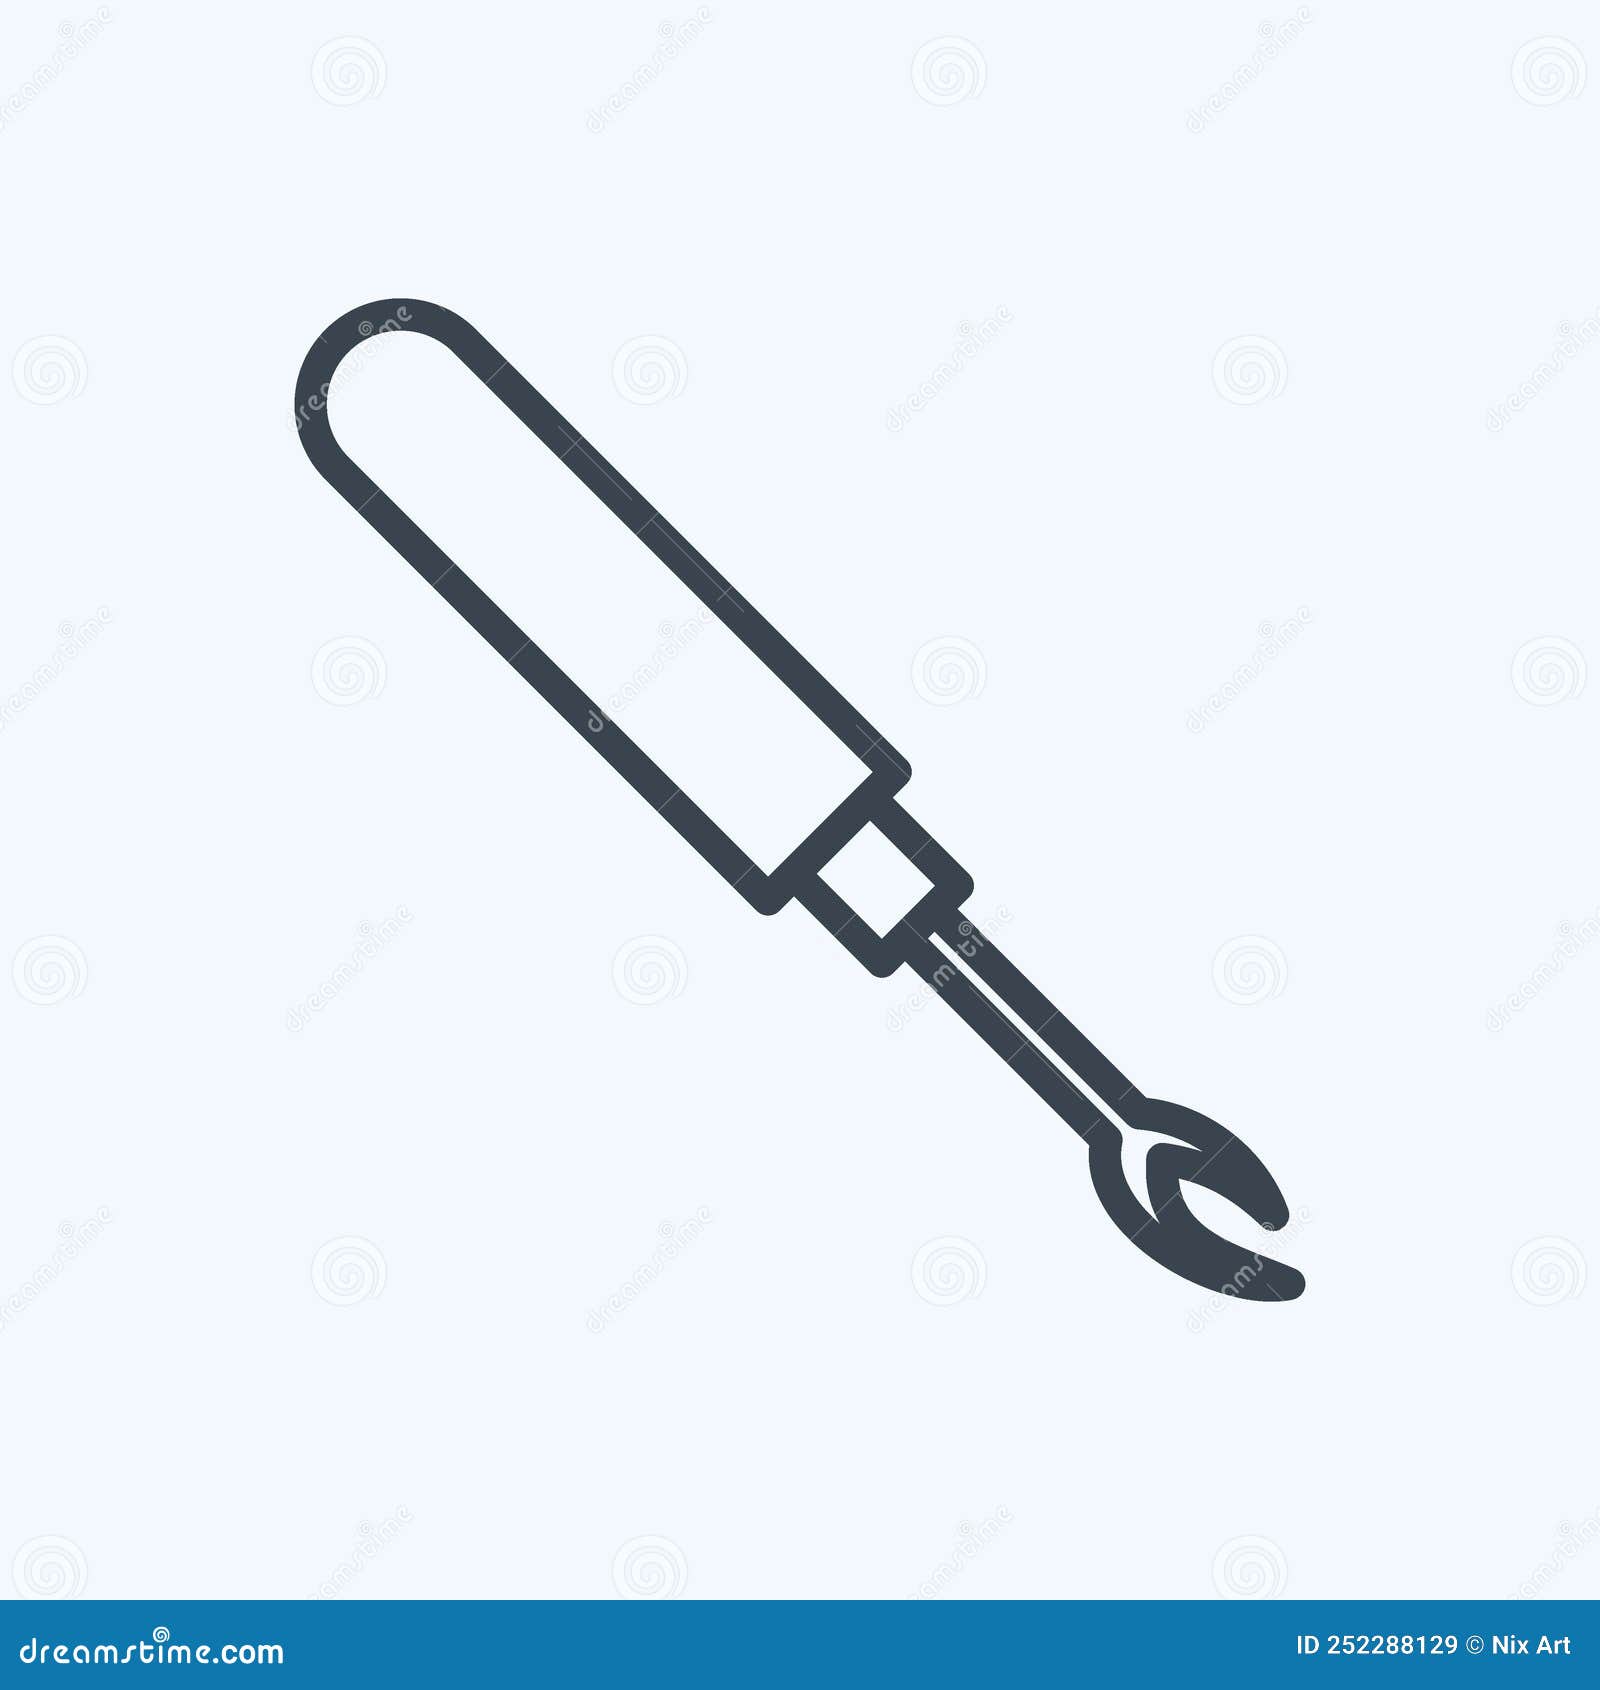 Sewing Seam Ripper Icon Stock Illustration - Download Image Now